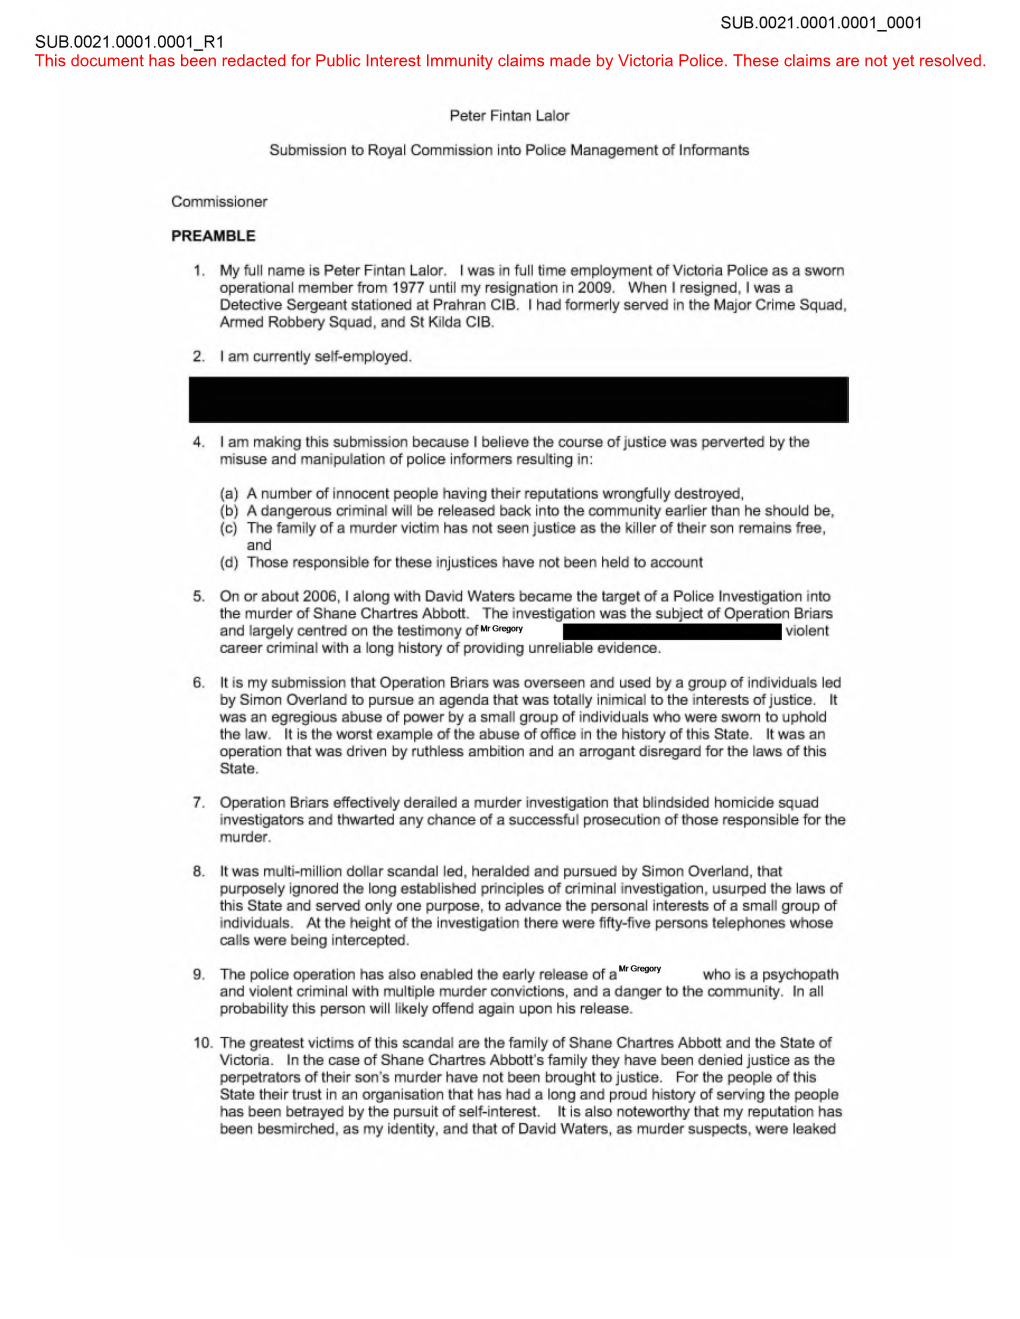 This Document Has Been Redacted for Public Interest Immunity Claims Made by Victoria Police